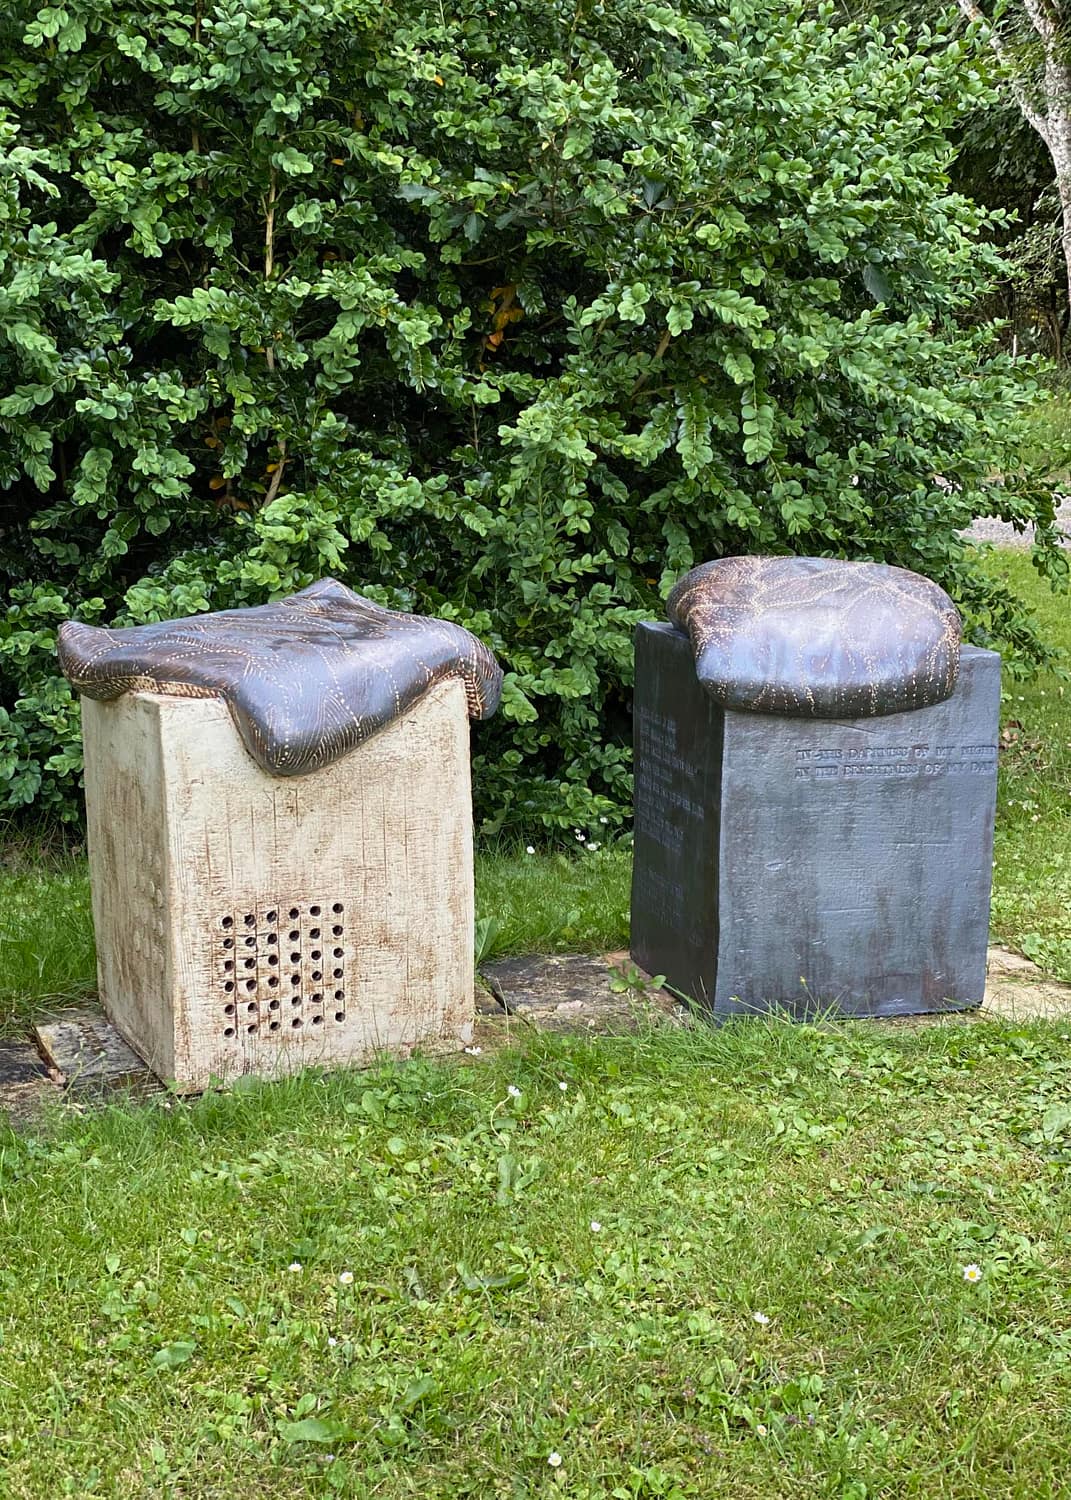 Two sculpture chairs on a lawn